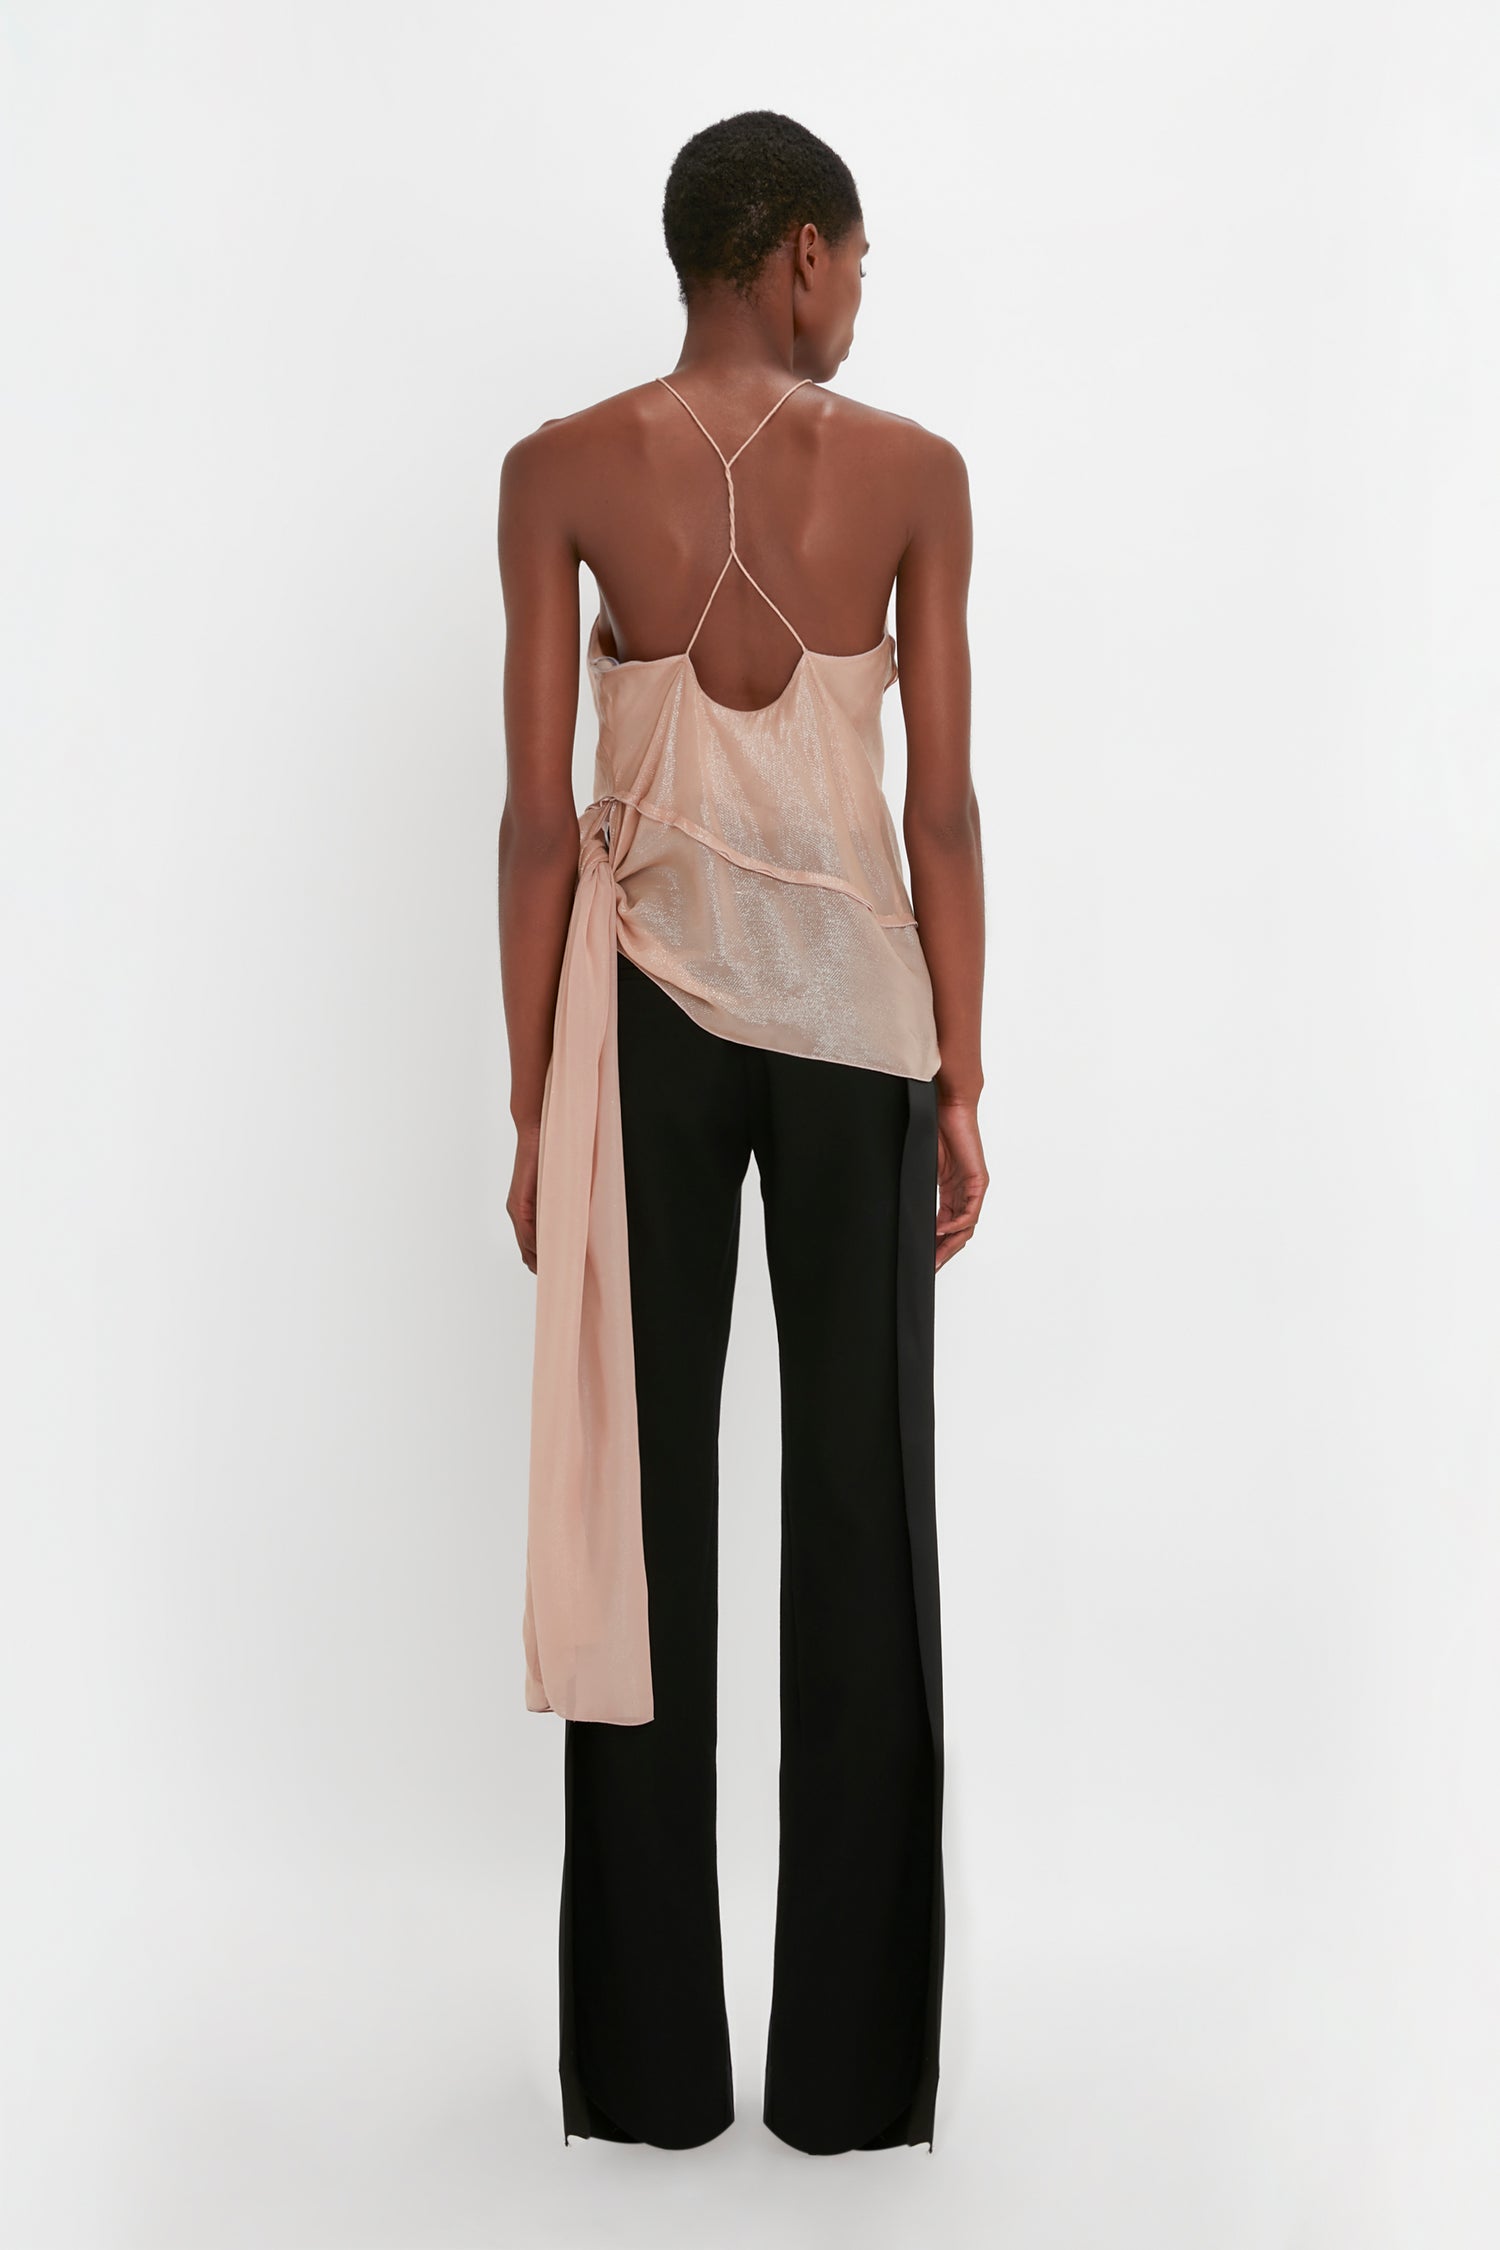 A person stands facing away, wearing a Victoria Beckham Flower Detail Cami Top In Rosewater. They pair it with black Satin Panel Straight Leg Trousers, against a plain white background.